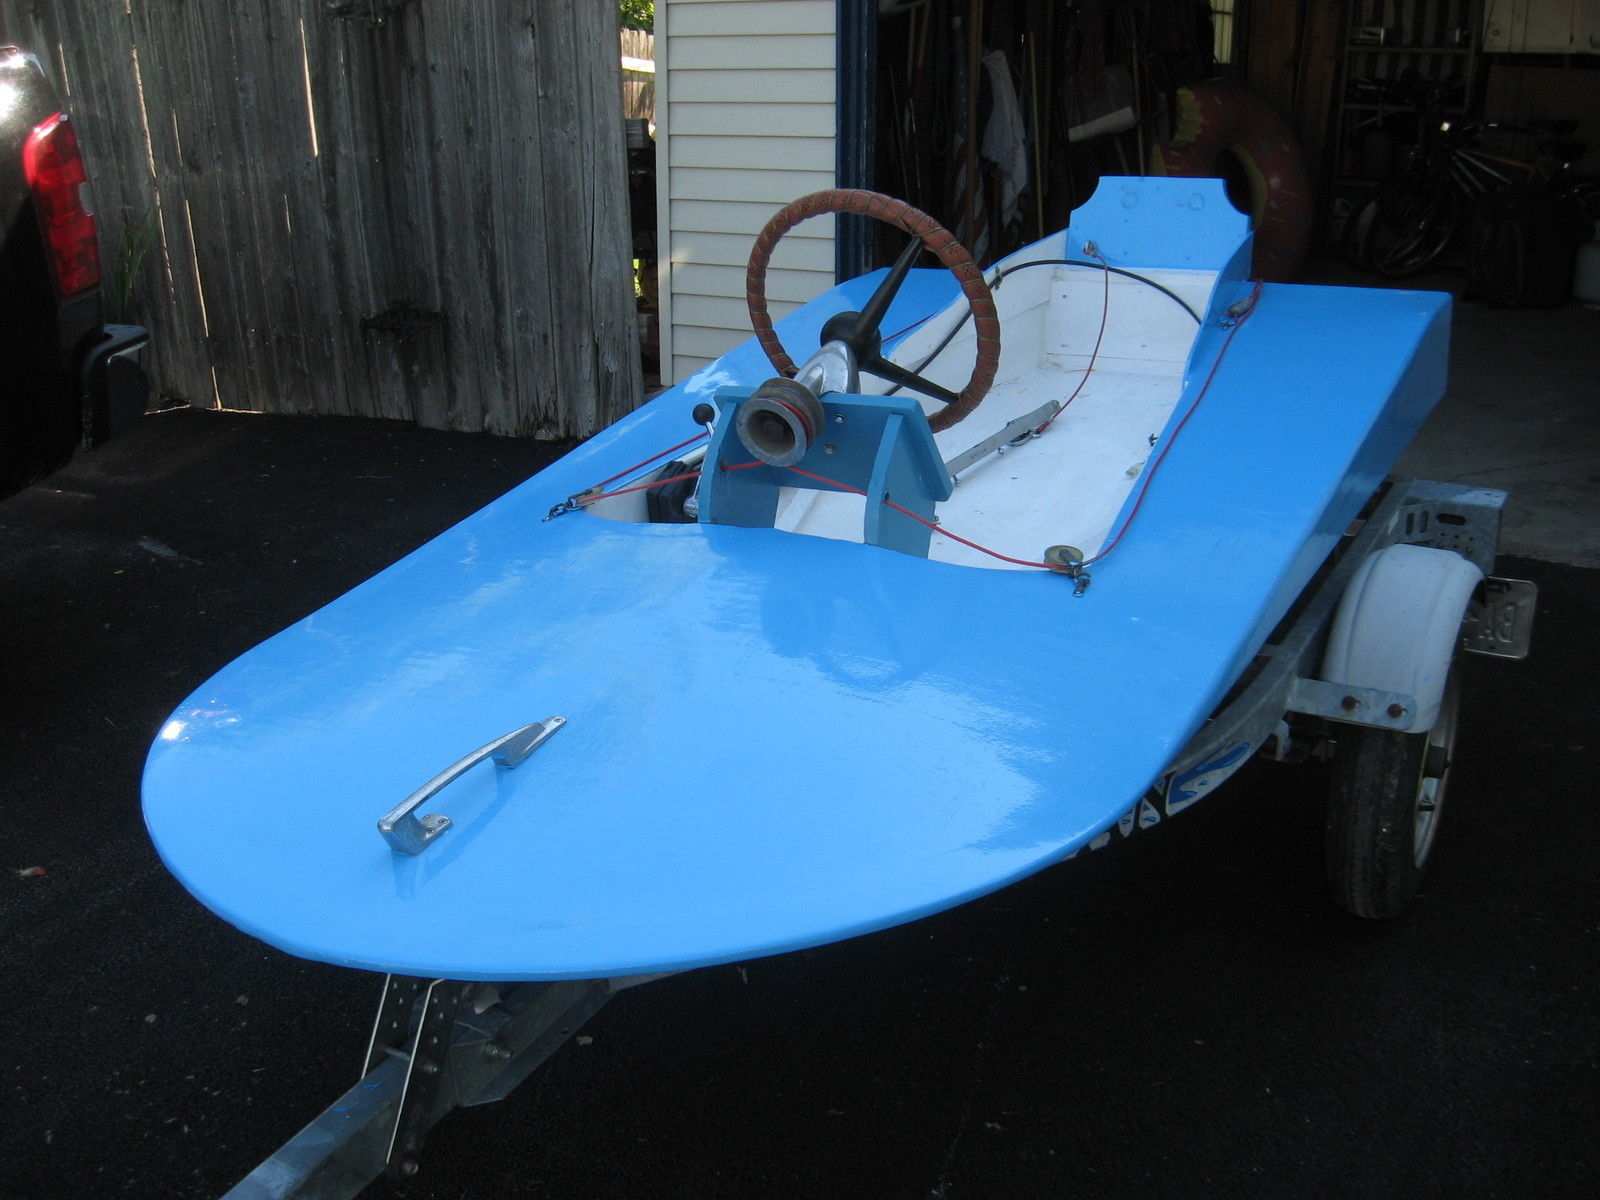 home built mini max hydroplane 2010 for sale for $550